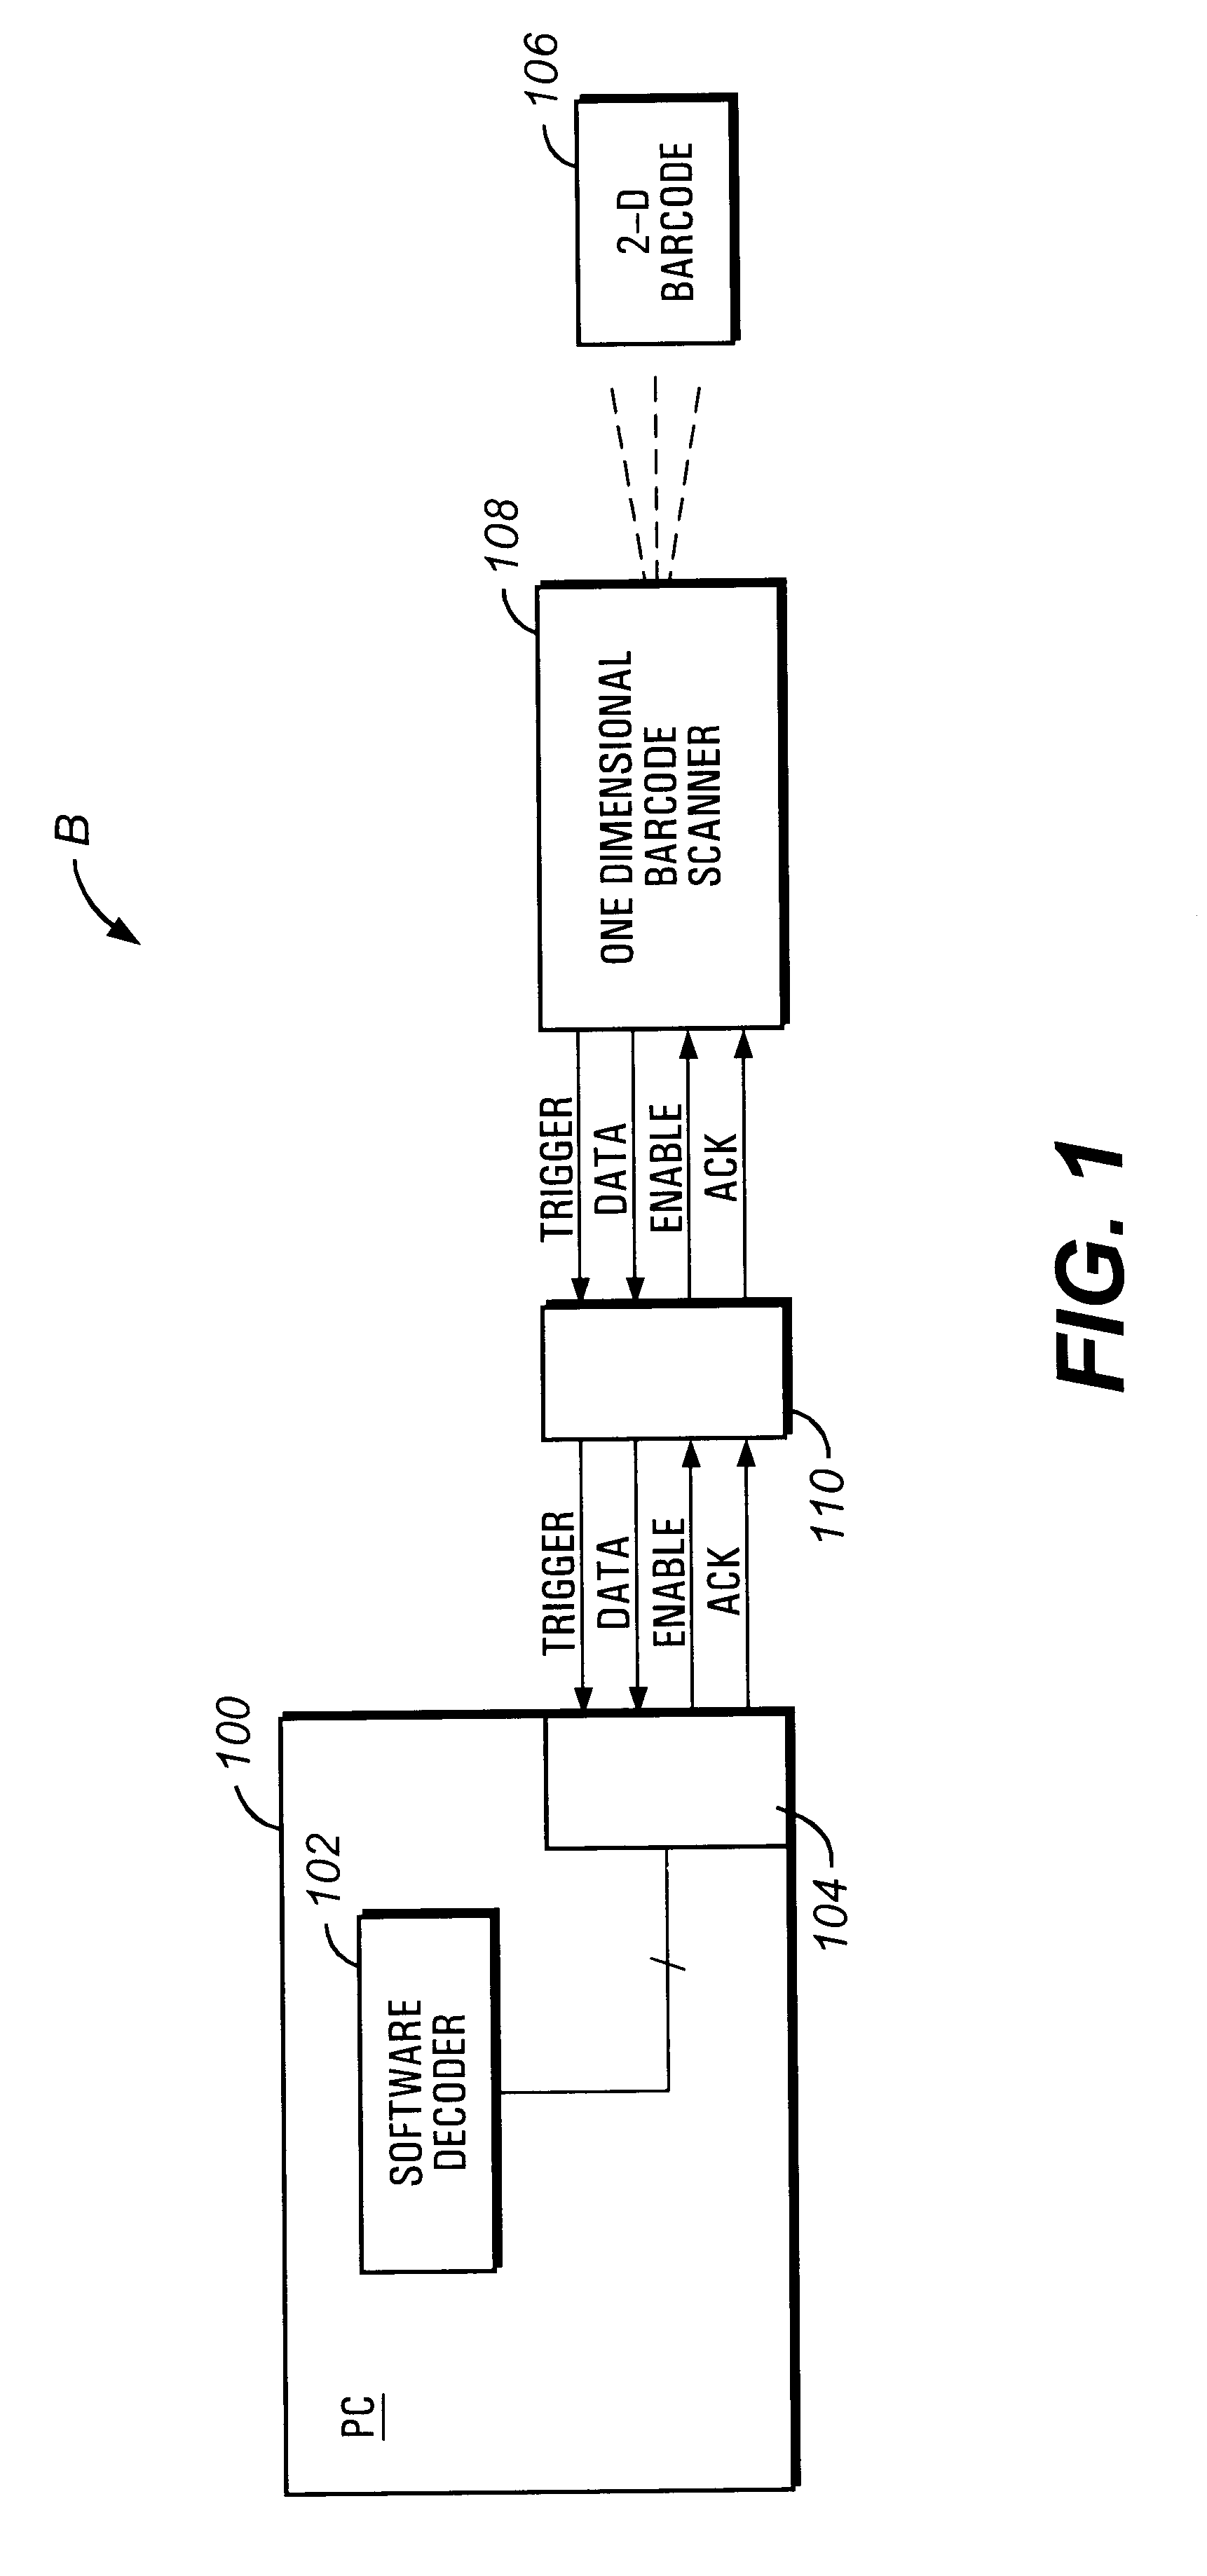 Scanning system for decoding two-dimensional barcode symbologies with a one-dimensional general purpose scanner